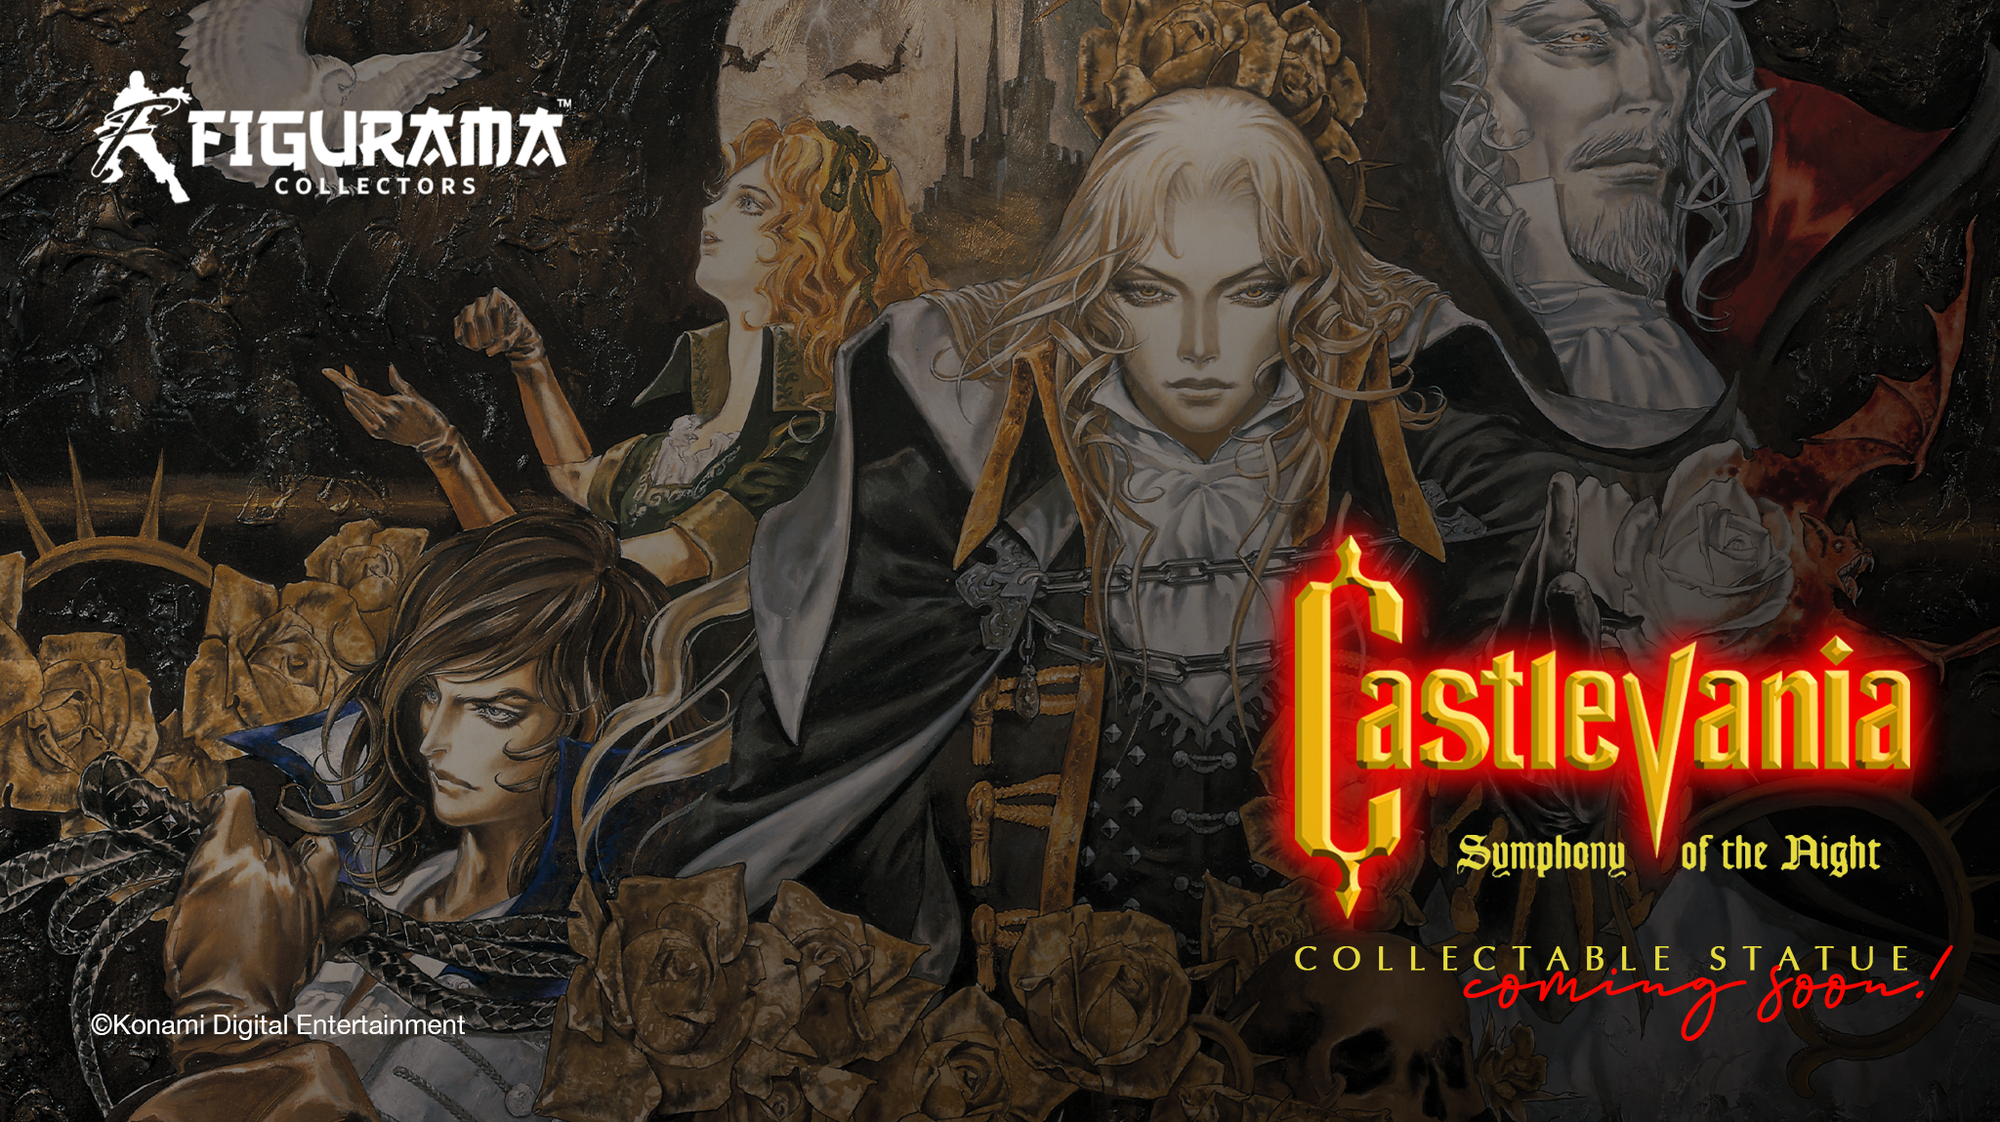 Figurama Collectors Announces 1st Video Game License - Castlevania: Symphony of the Night